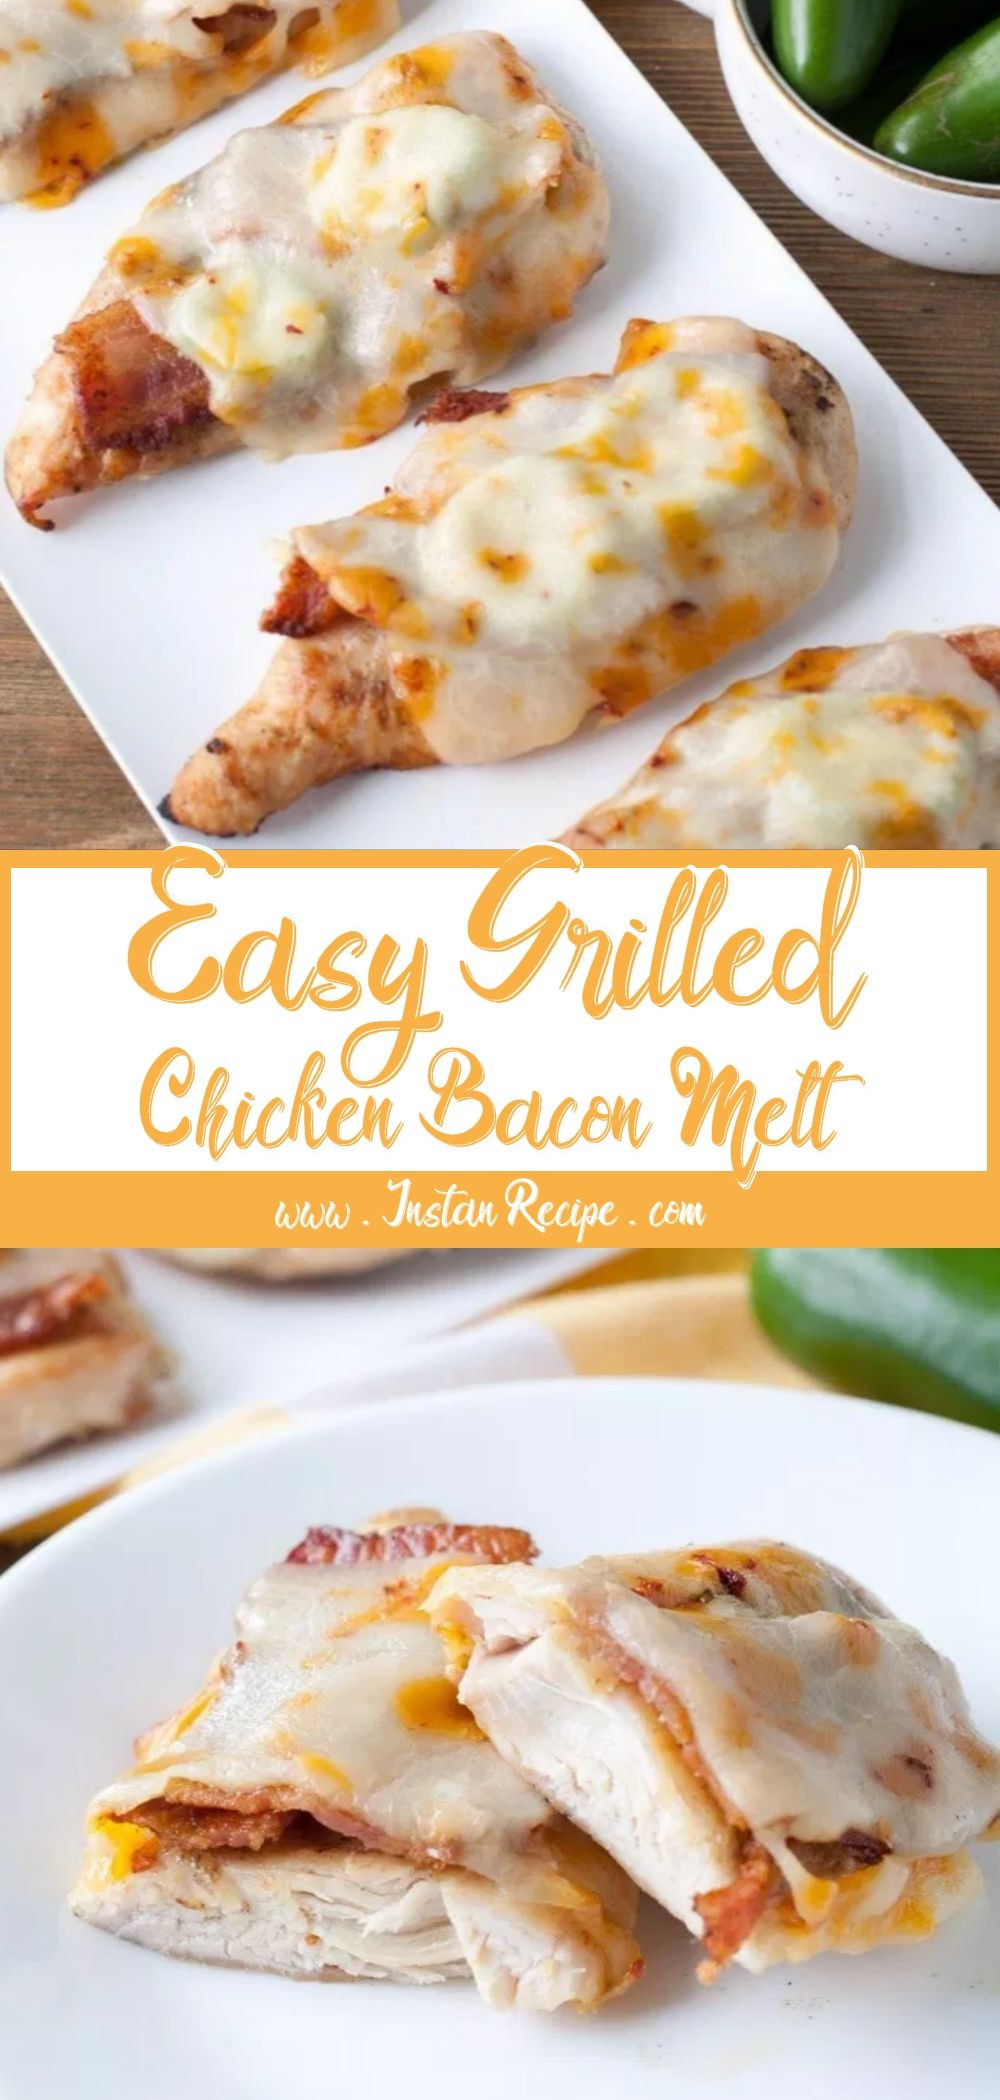 Low Calorie Grilled Chicken Recipes
 Grilled Chicken Bacon Melt in 2020